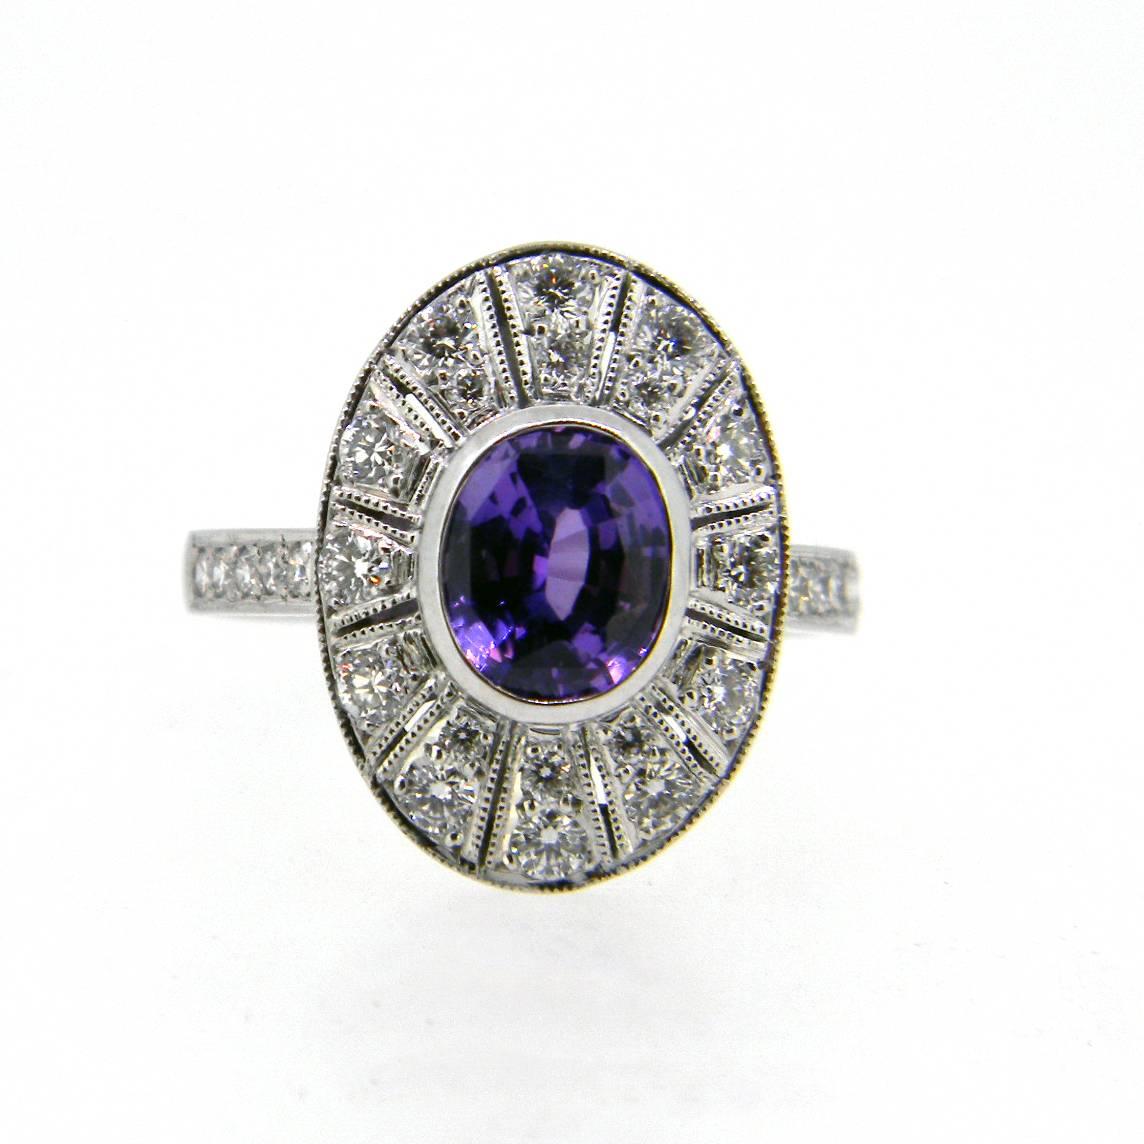 From our 'Gatsby' collection this beautiful handmade Art Deco style ring is centered with a stunning mid purple (slightly darker than image) sapphire of 1.74cts and surrounded by 28 grain set brilliant cut diamonds weighting 0.56ct G/H Si1. Ring